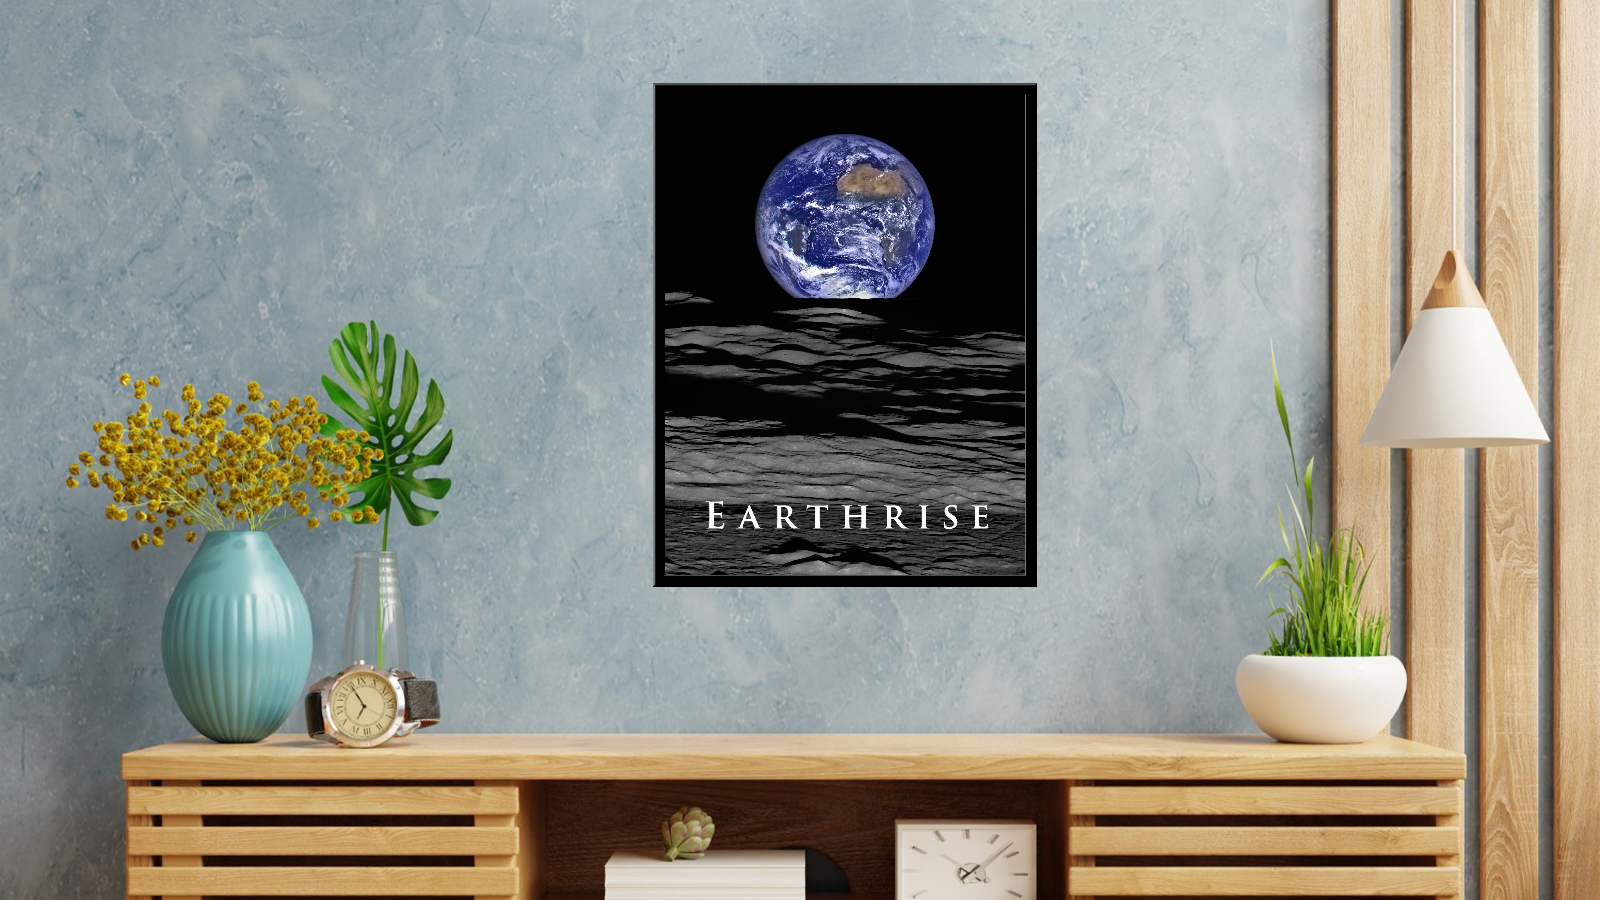 Earthrise on the Moon - signed